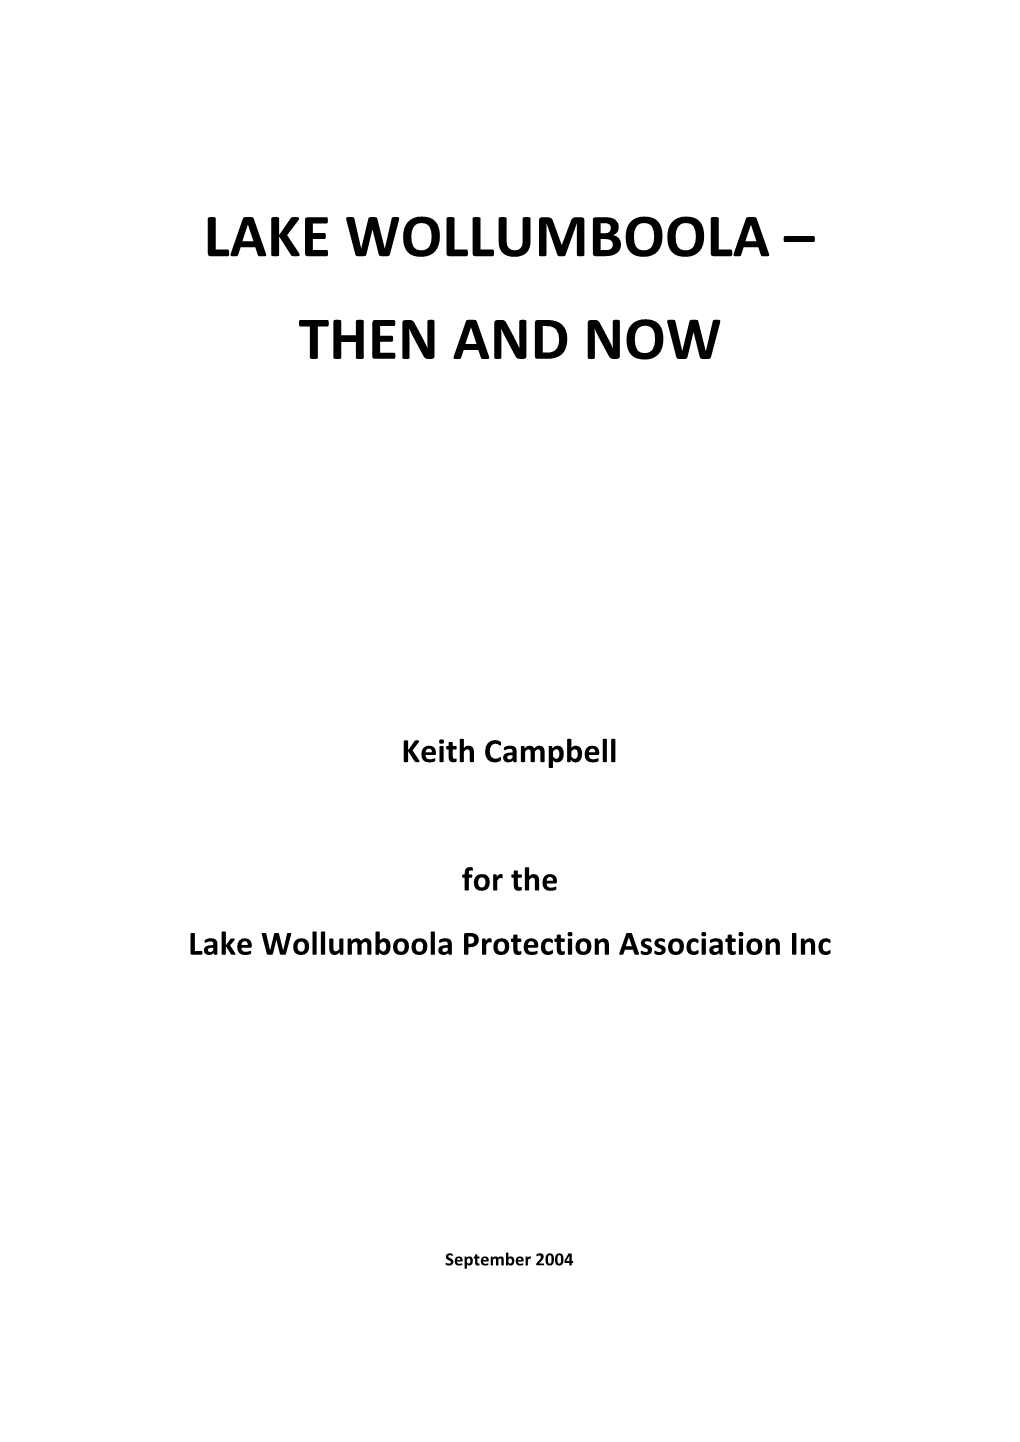 Lake Wollumboola – Then and Now